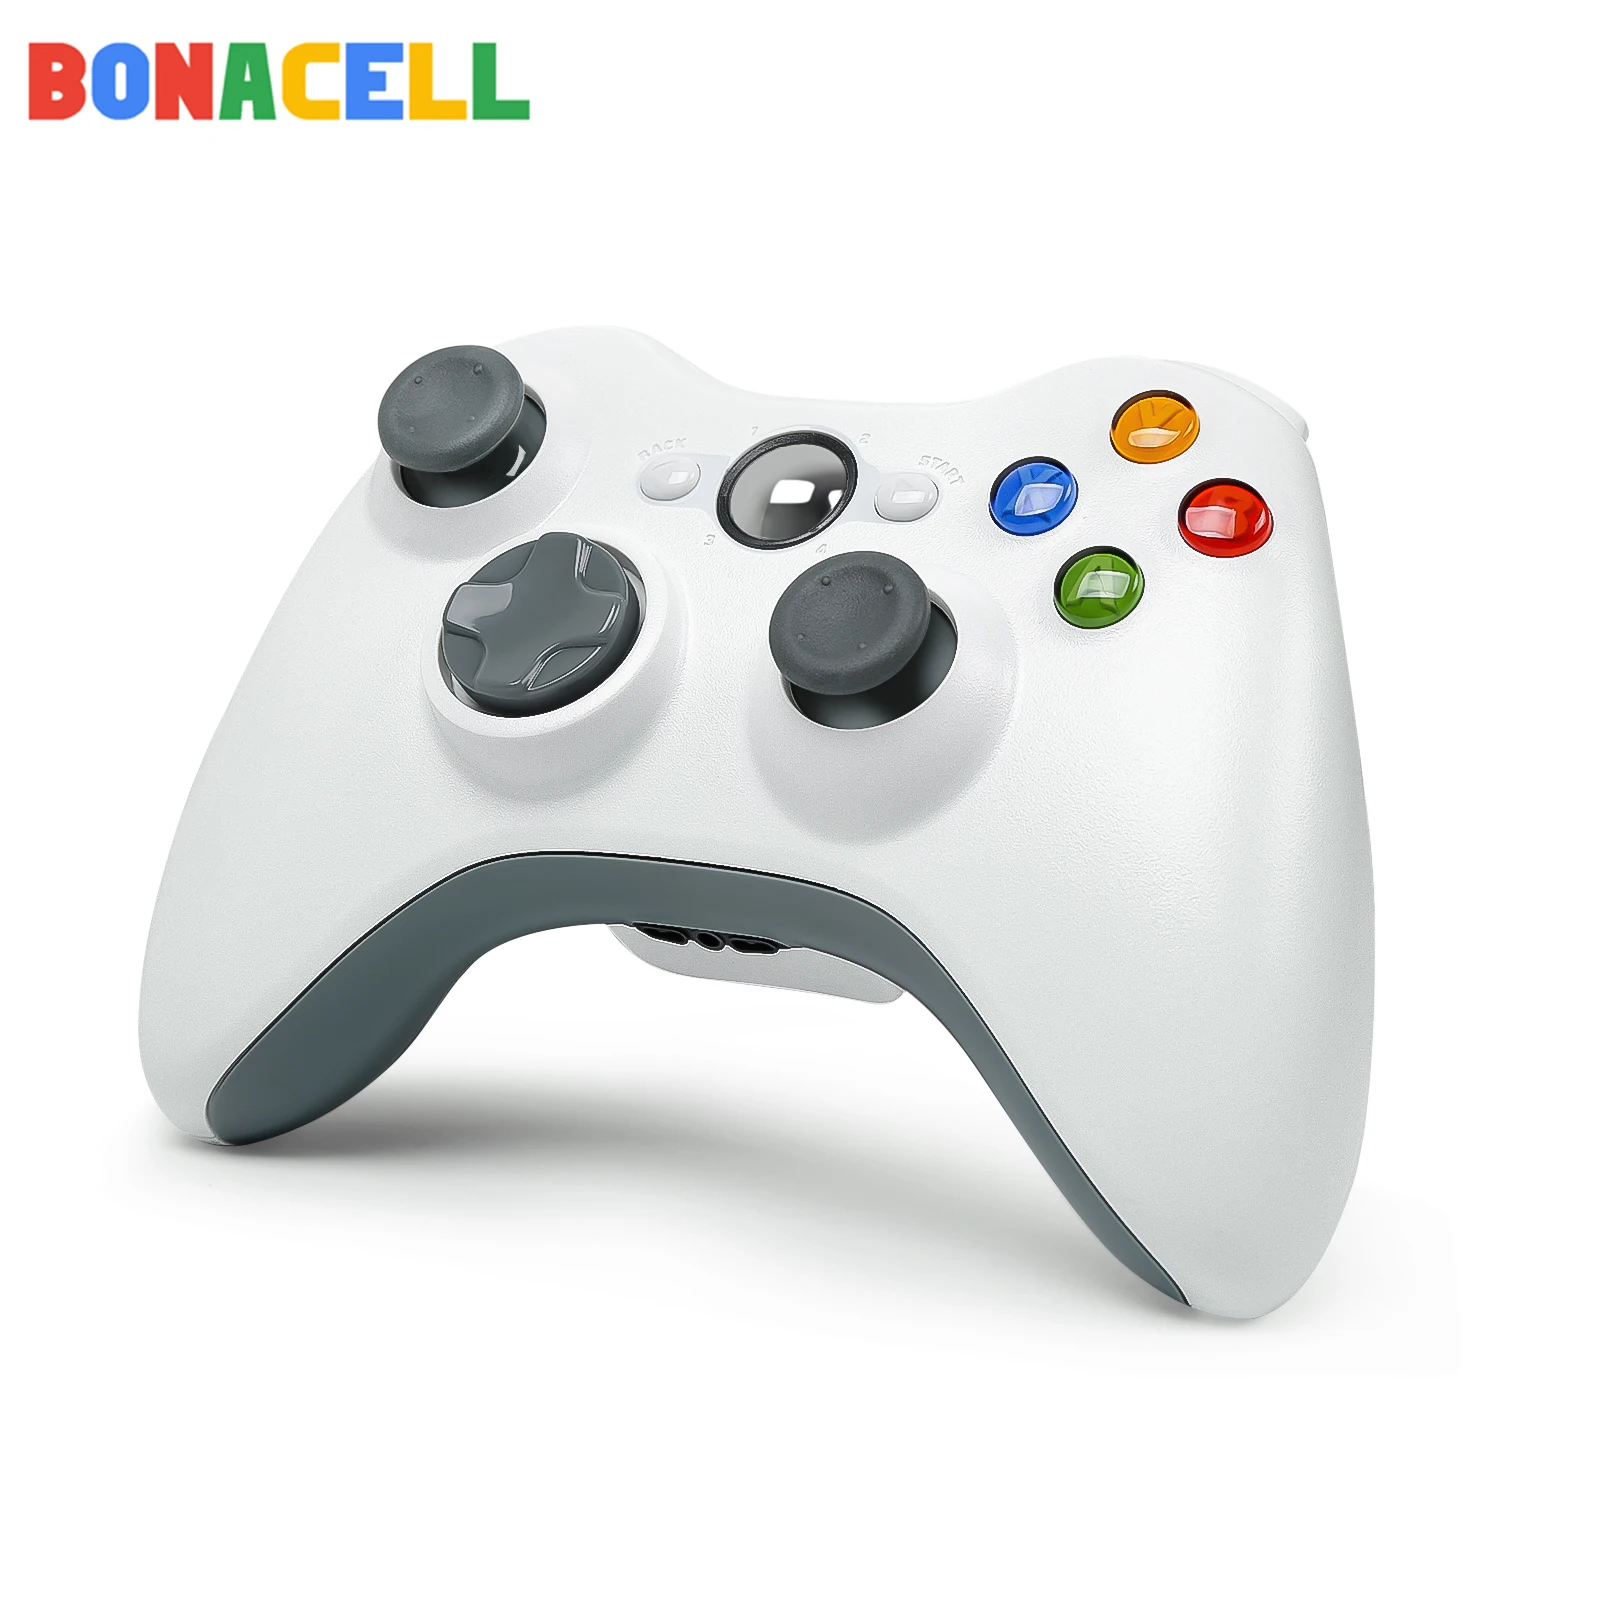 Wireless Game Controller For Xbox360 2.4GH Gamepad Joystick For XBOX360 Joypad For Microsoft PC Windows 7, 8, 10